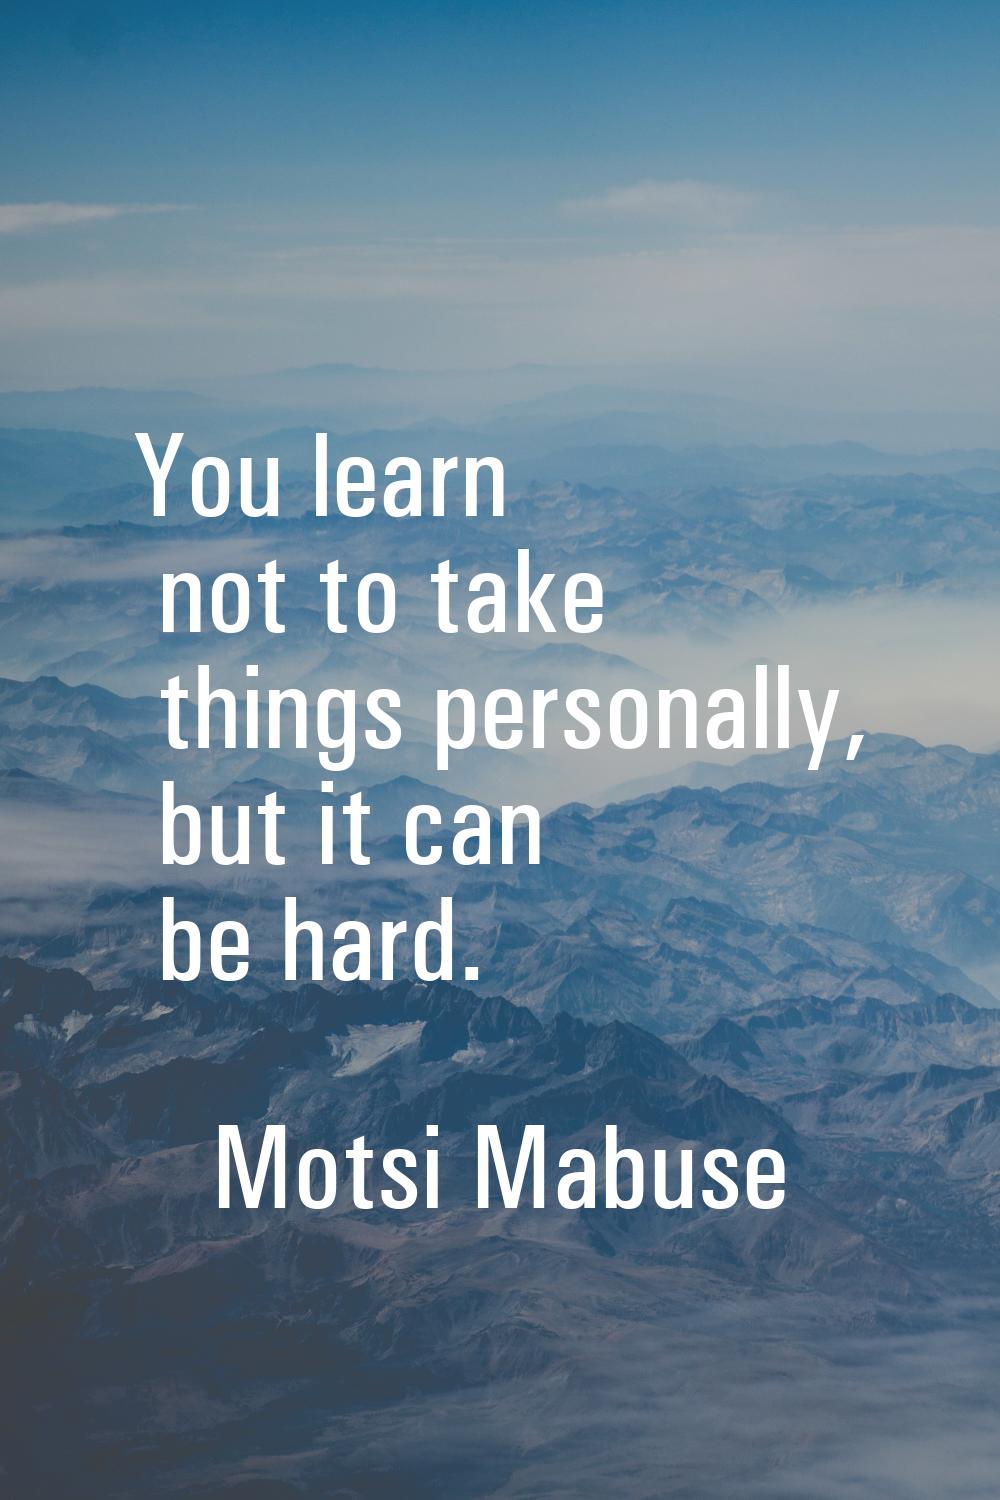 You learn not to take things personally, but it can be hard.